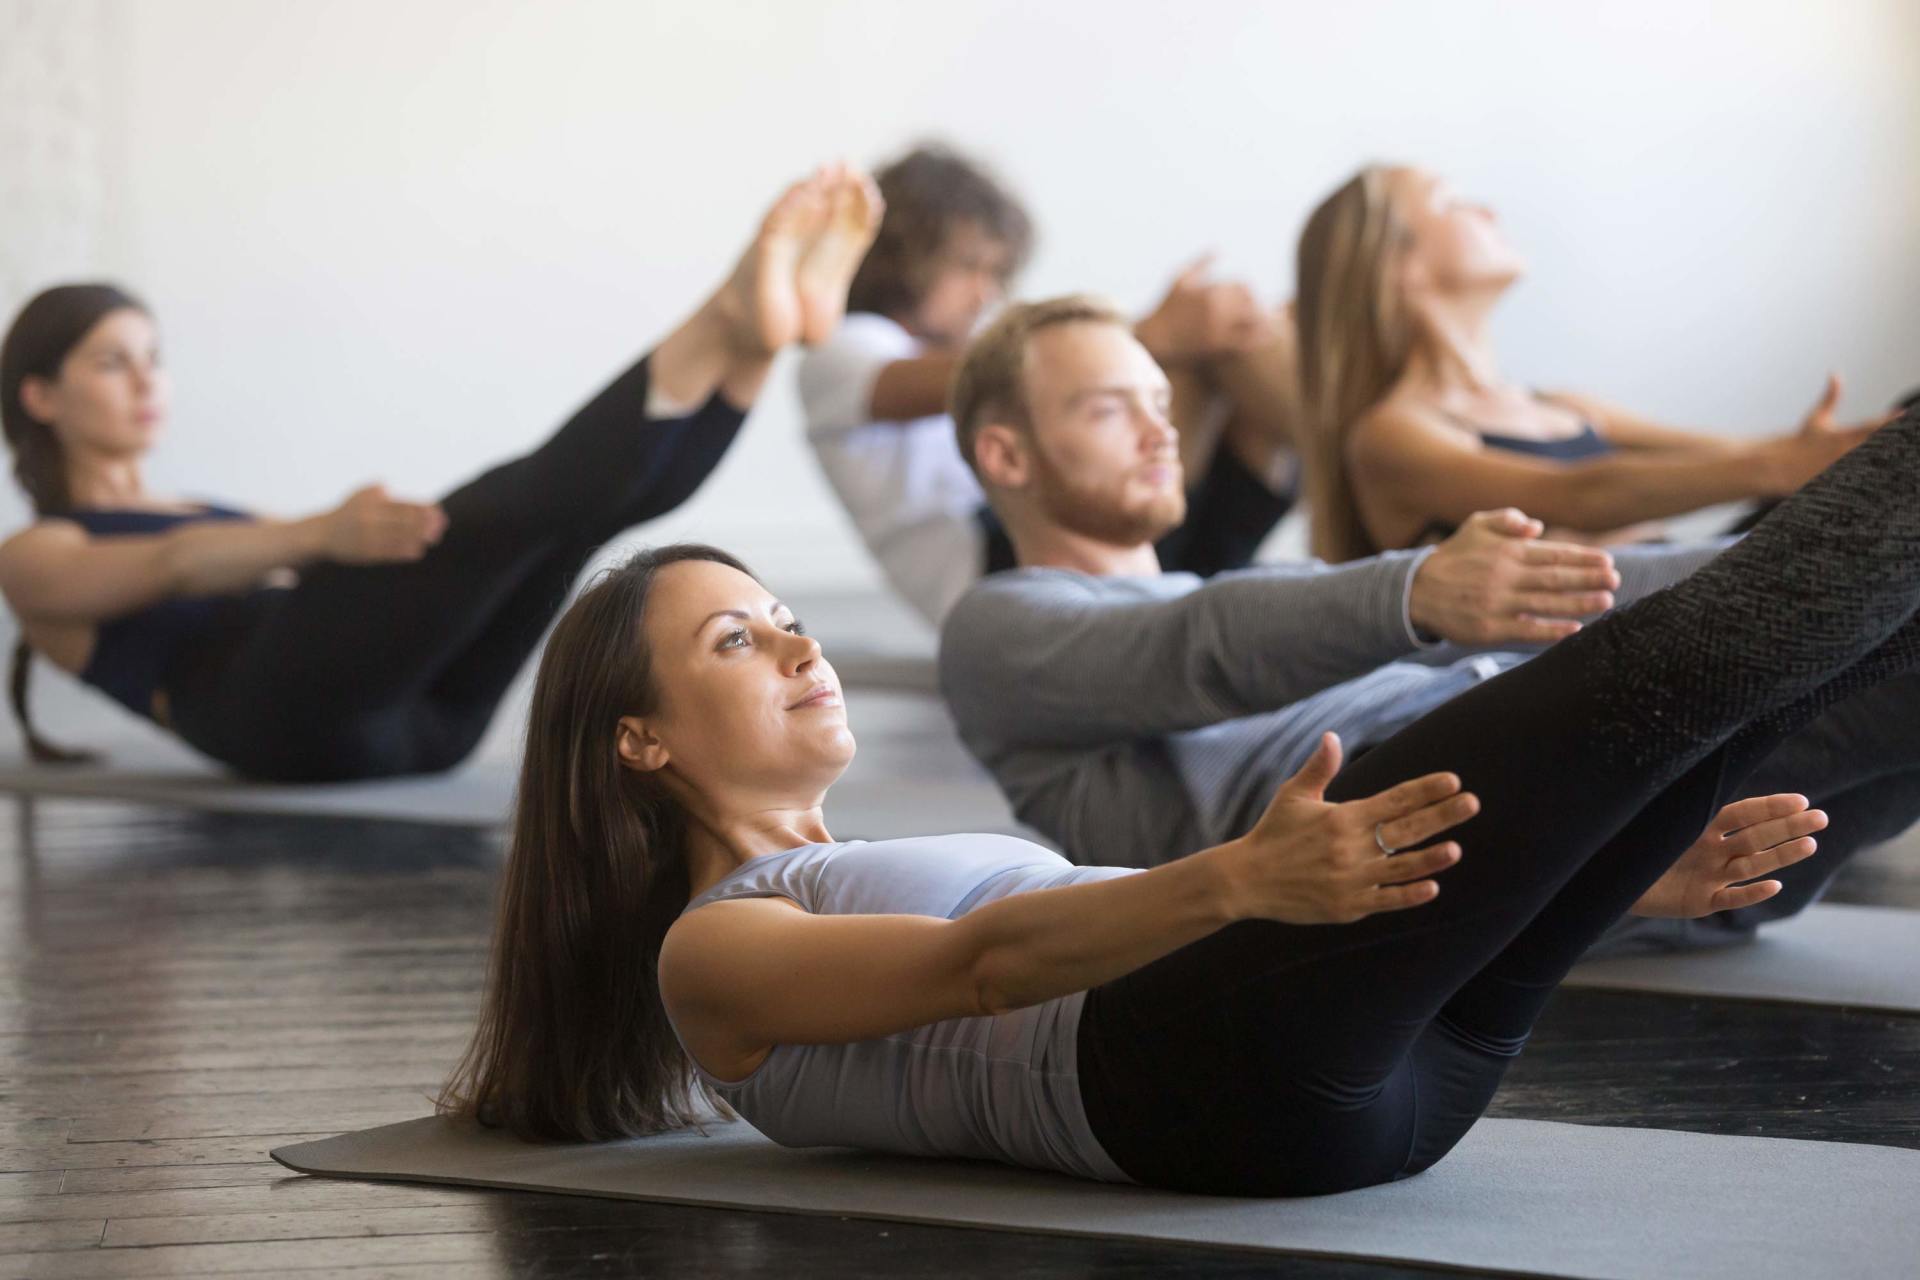 mat pilates classes in meredith nh at the fitness edge